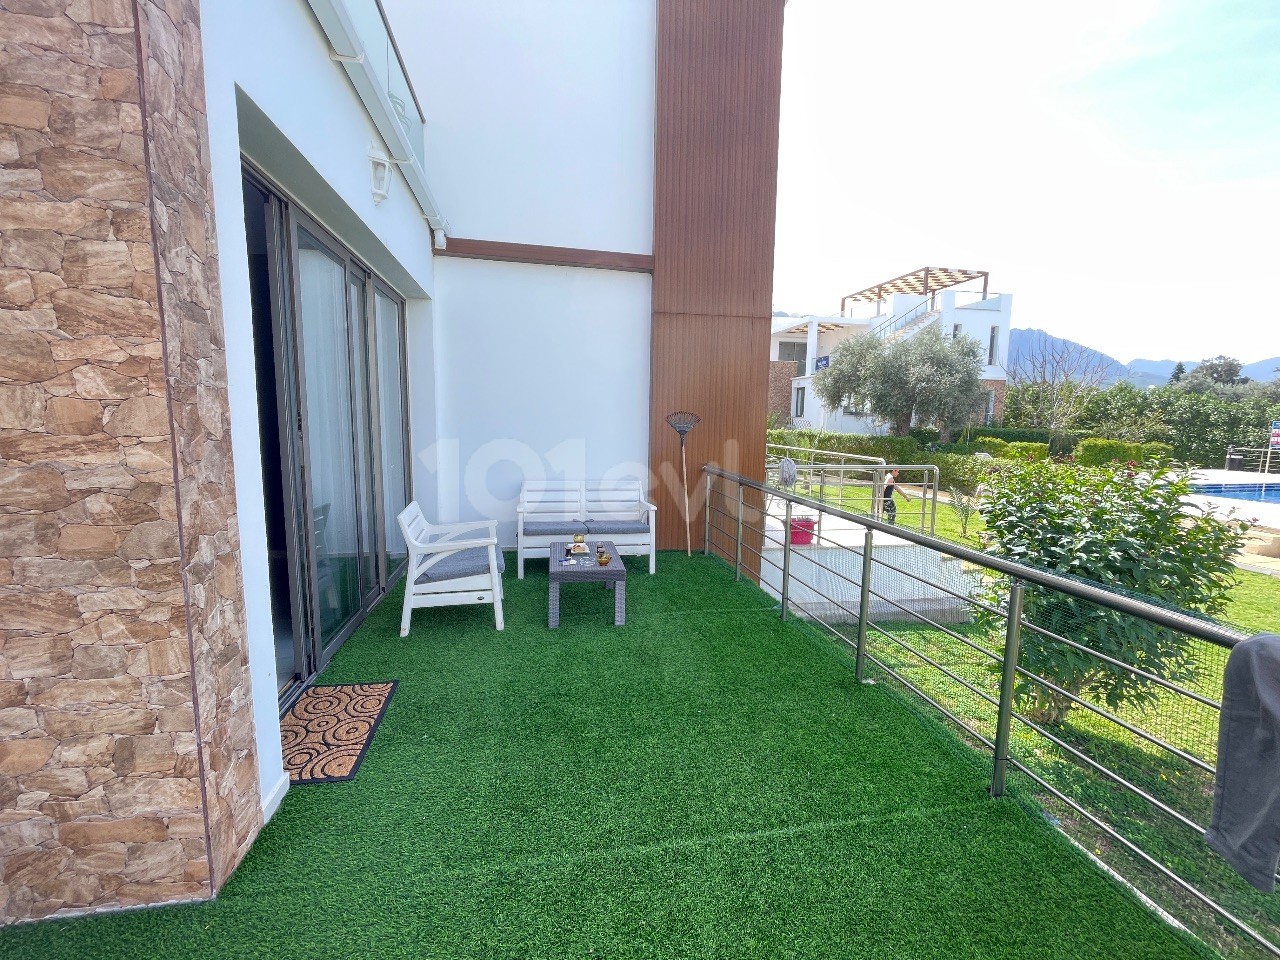 2+1 APARTMENT FOR RENT IN CYPRUS GİRNE OLIVE GROVE AREA